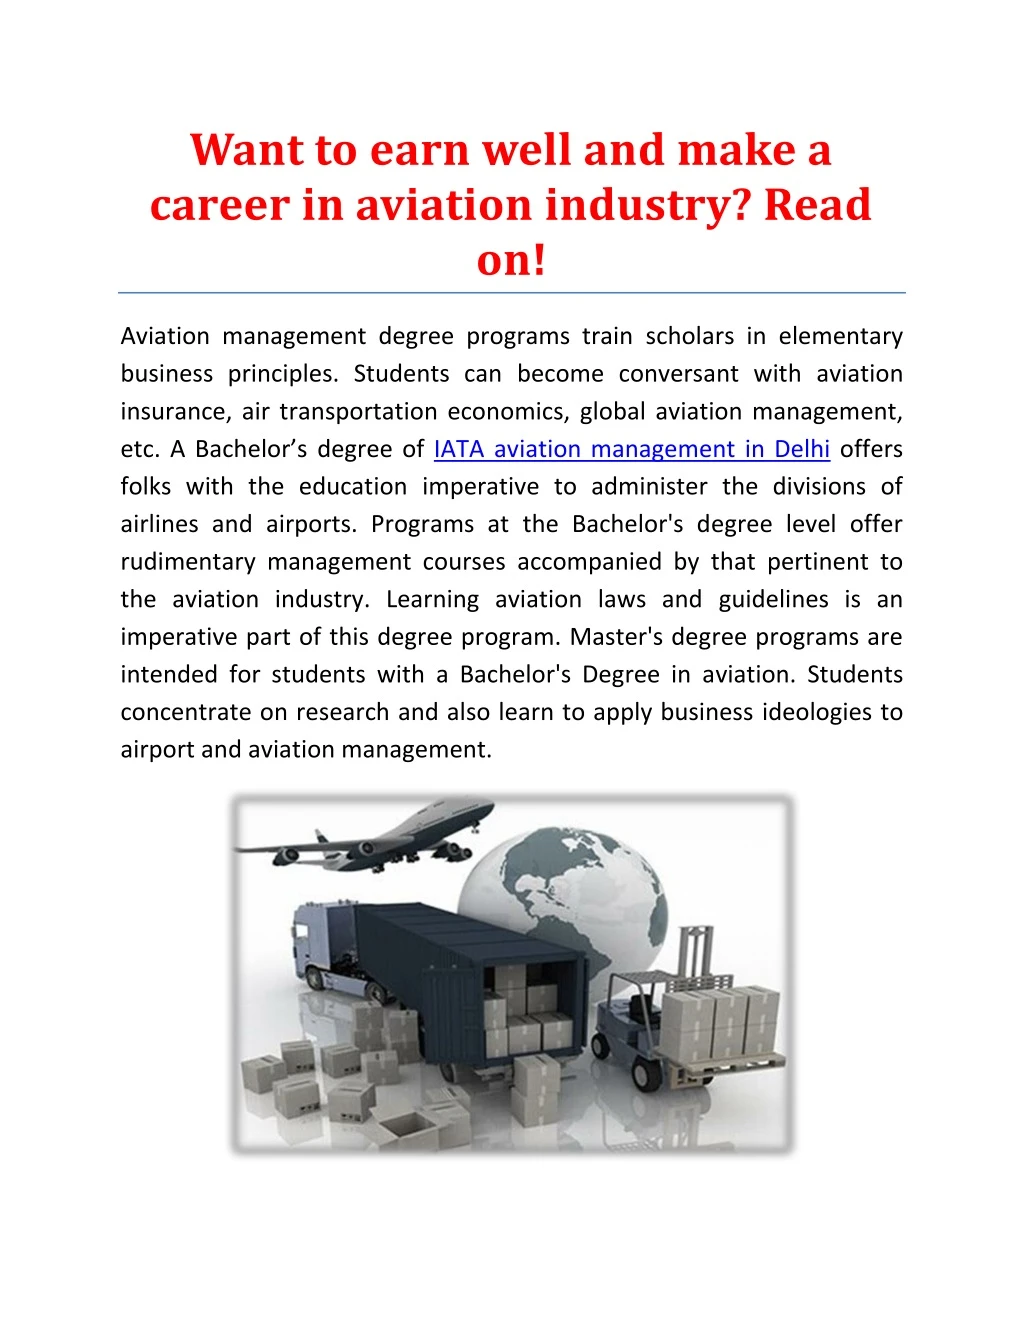 want to earn well and make a career in aviation